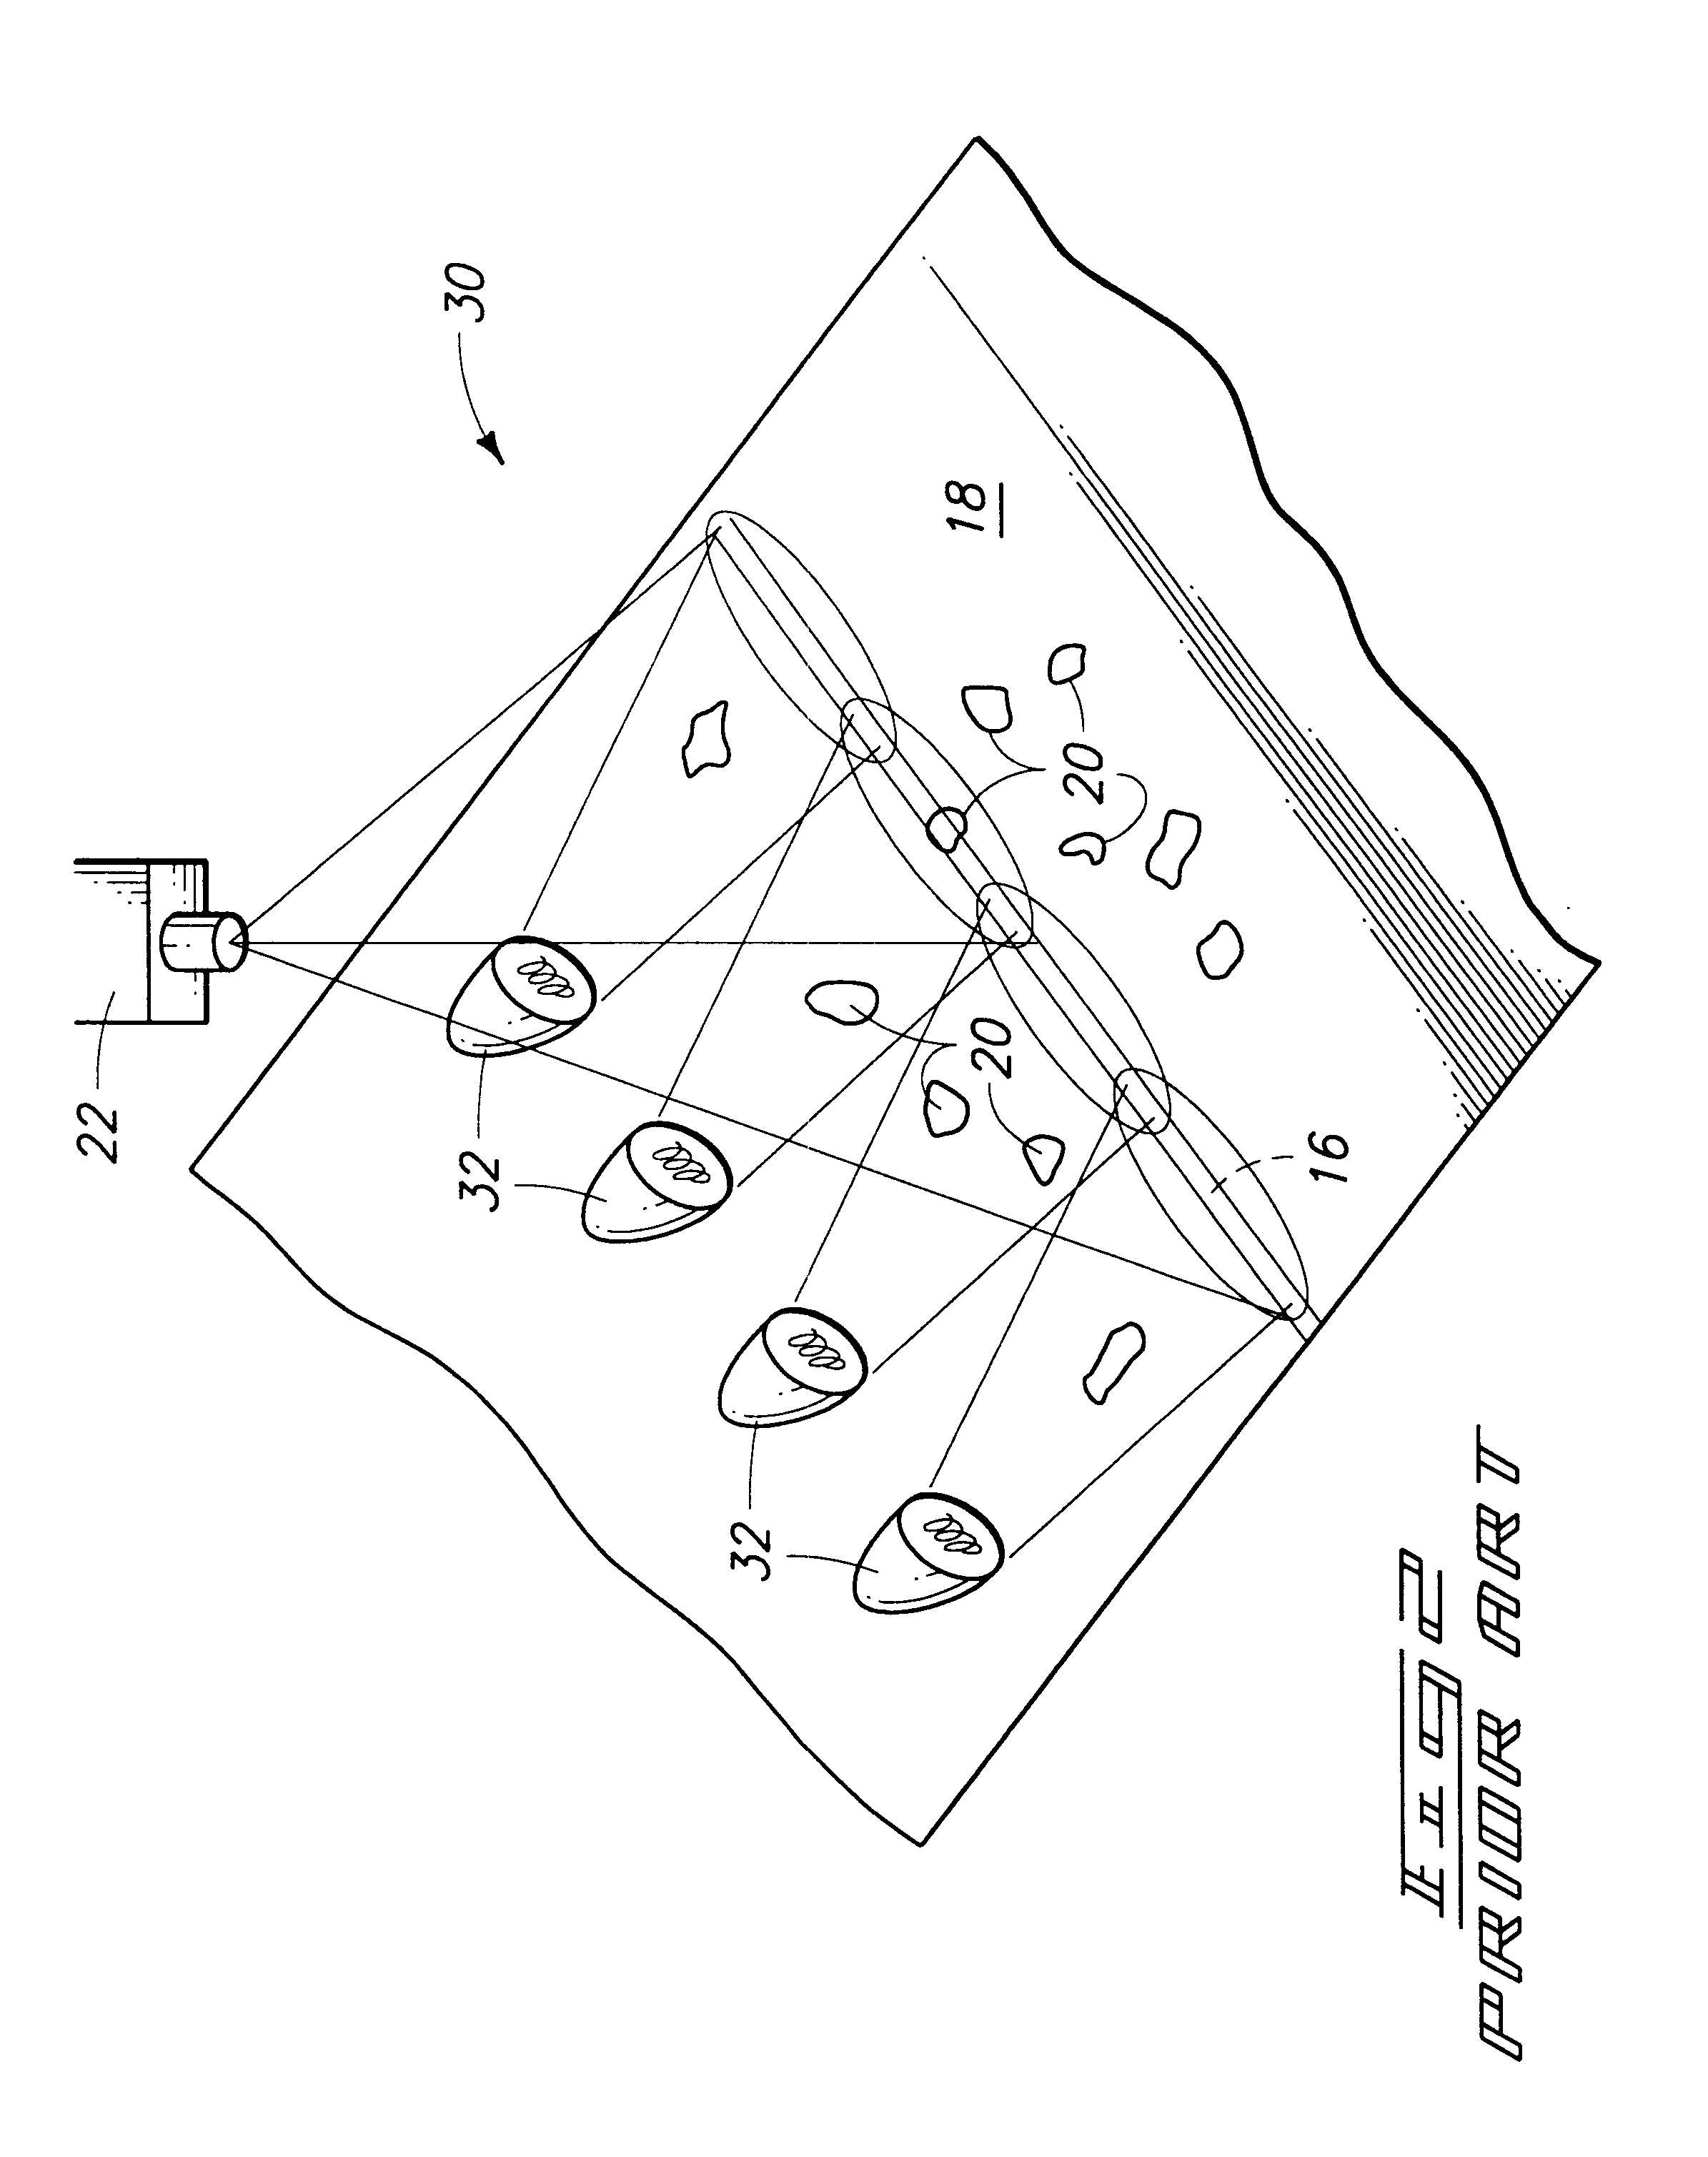 Peach pit detection apparatus and method